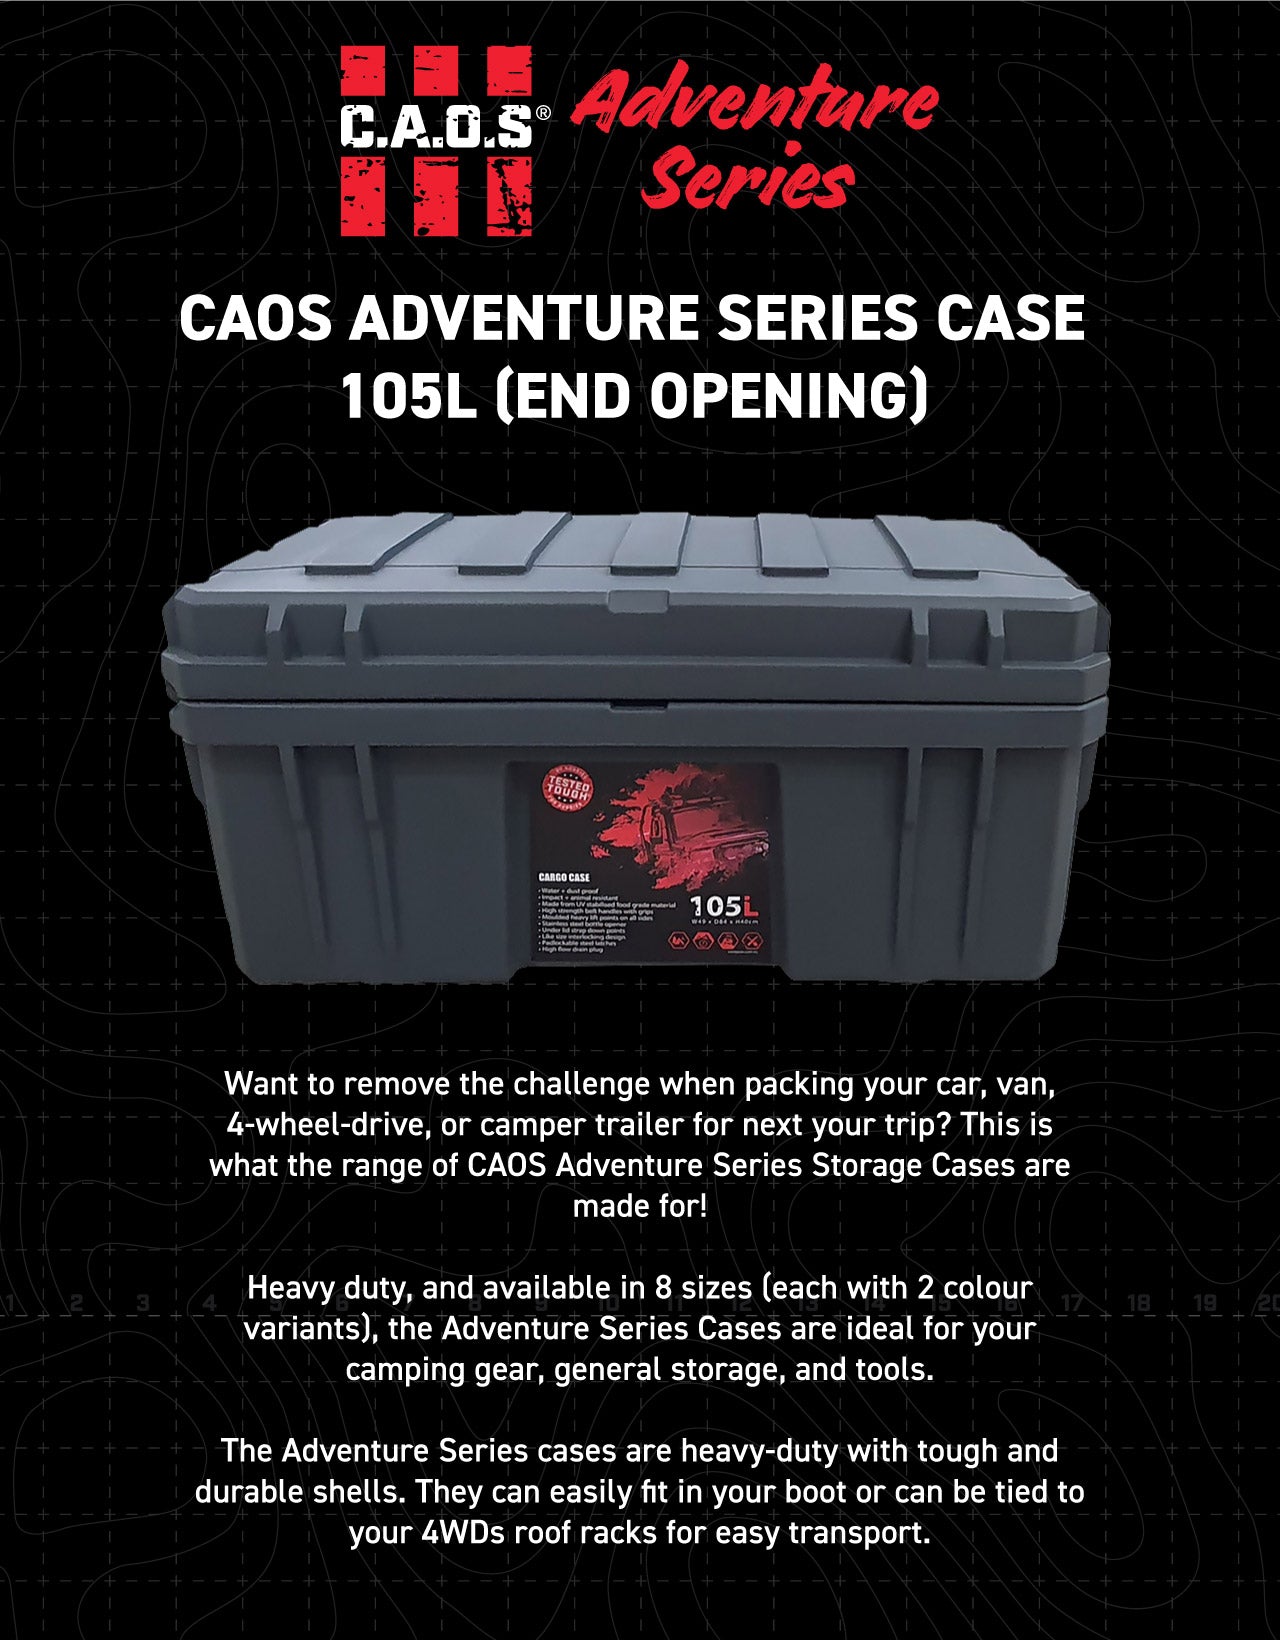 The Adventure Series cases are heavy-duty with tough and durable shells. They can easily fit in your boot or can be tied to your 4WDs roof racks for easy transport.